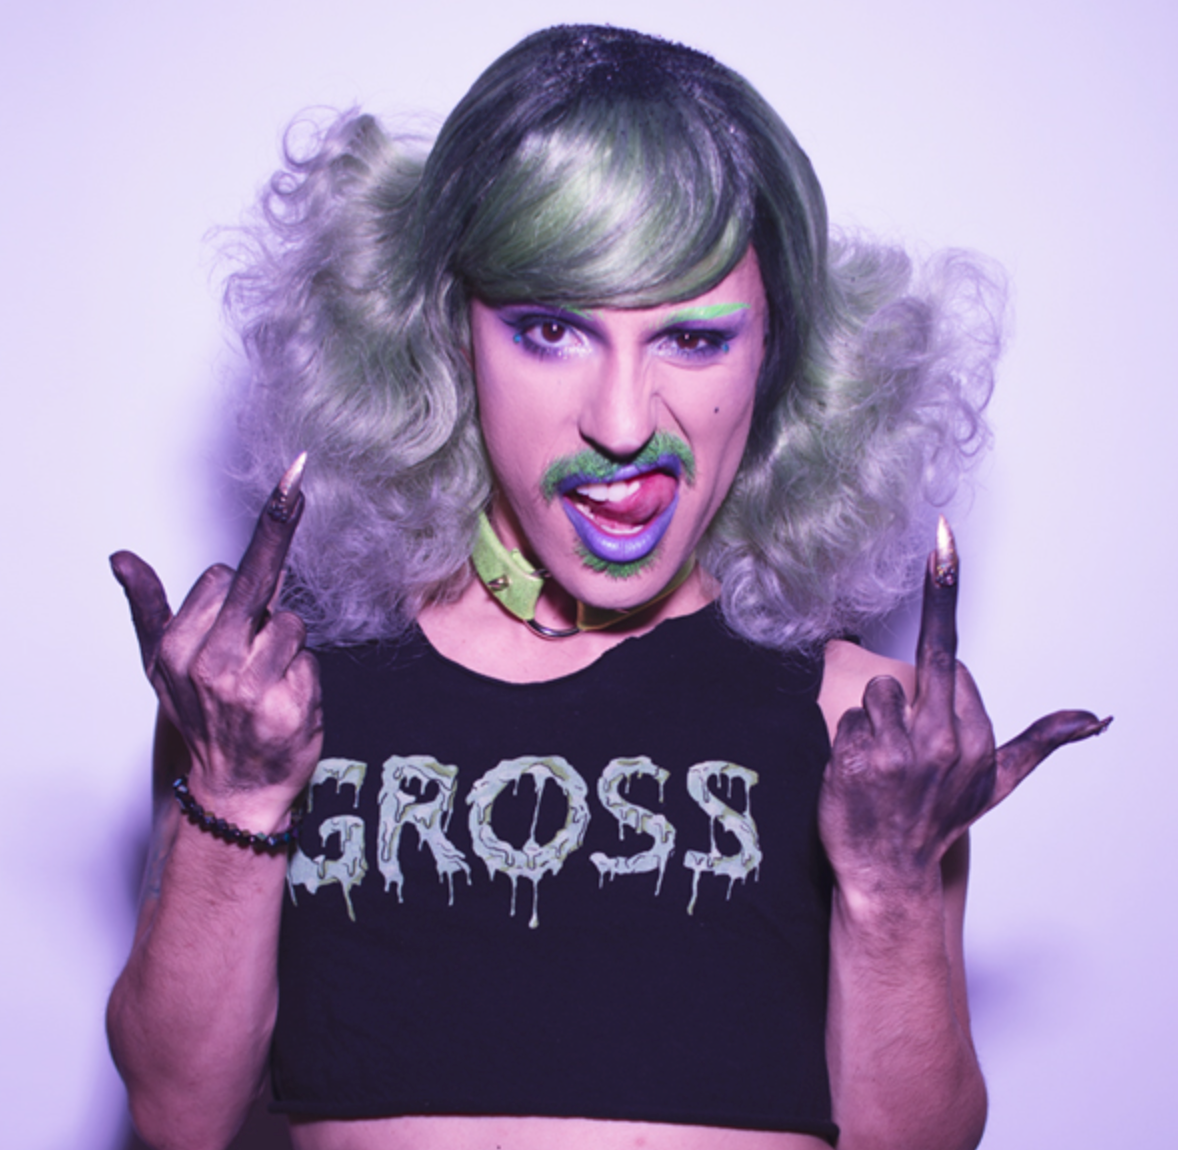 Vera Saucy Queer Fashion Designer and Drag Queen Flips You Off